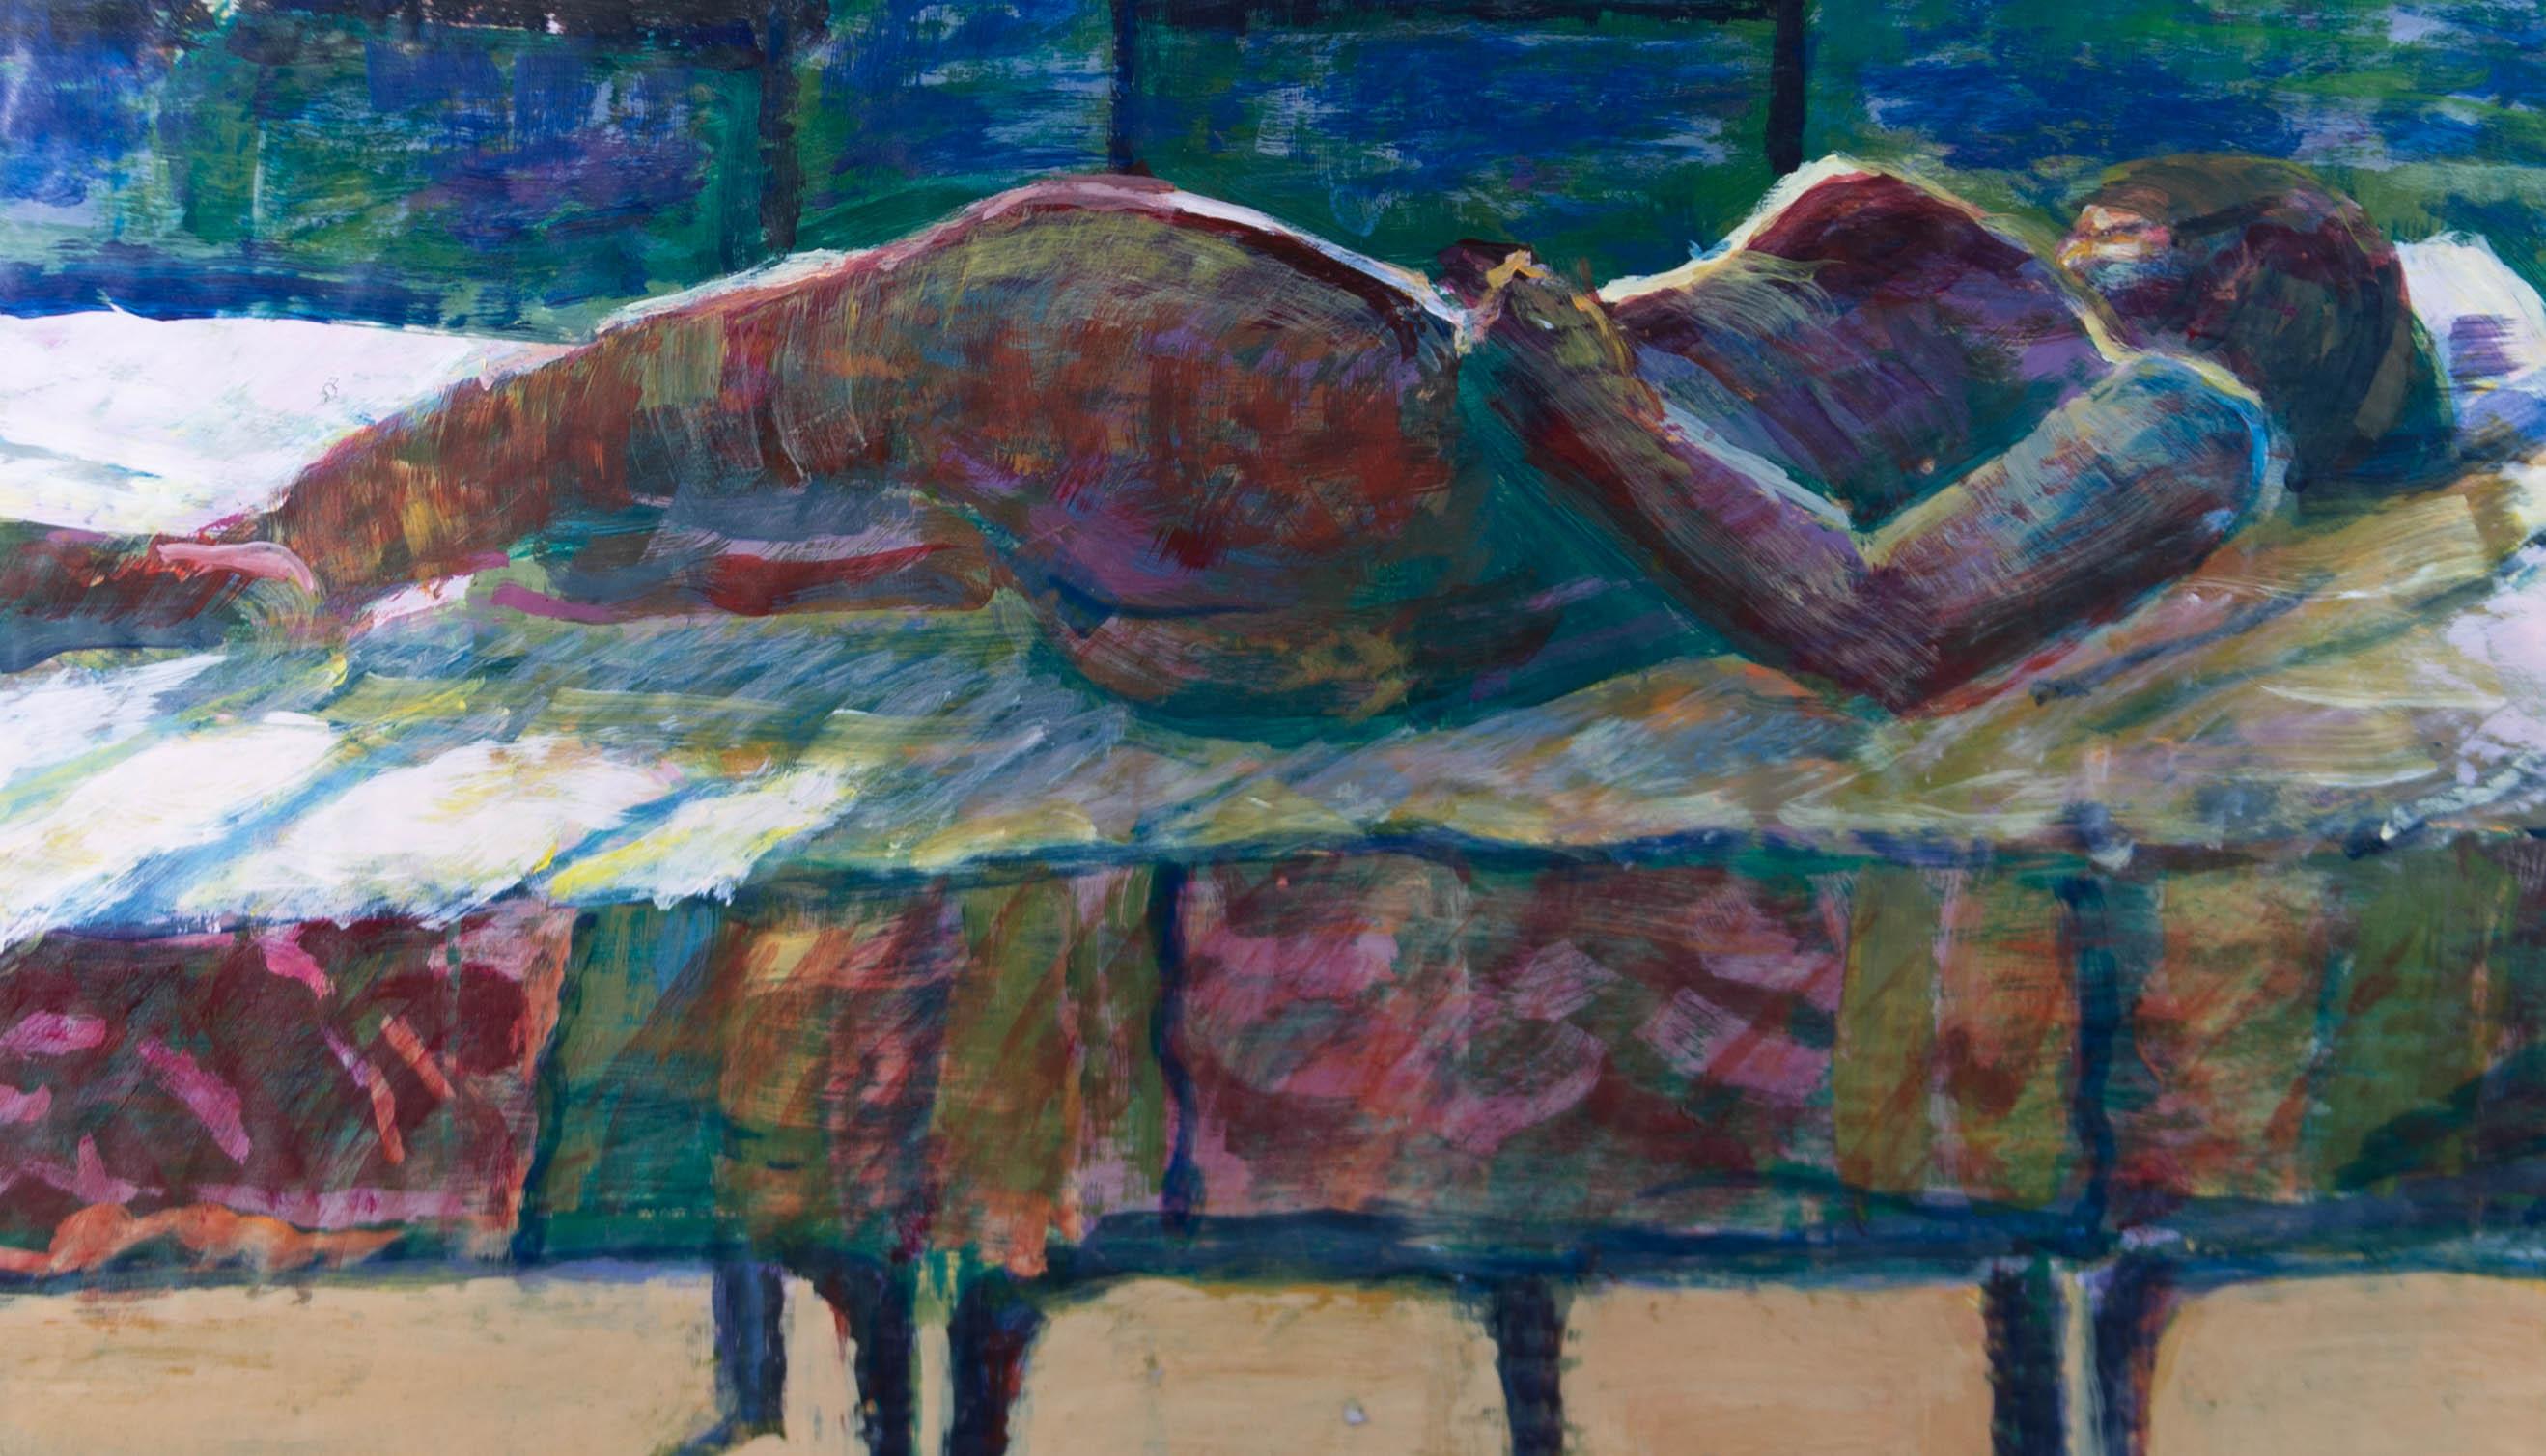 Susan Paine - Contemporary Oil, Reclining Nude on Bed 2